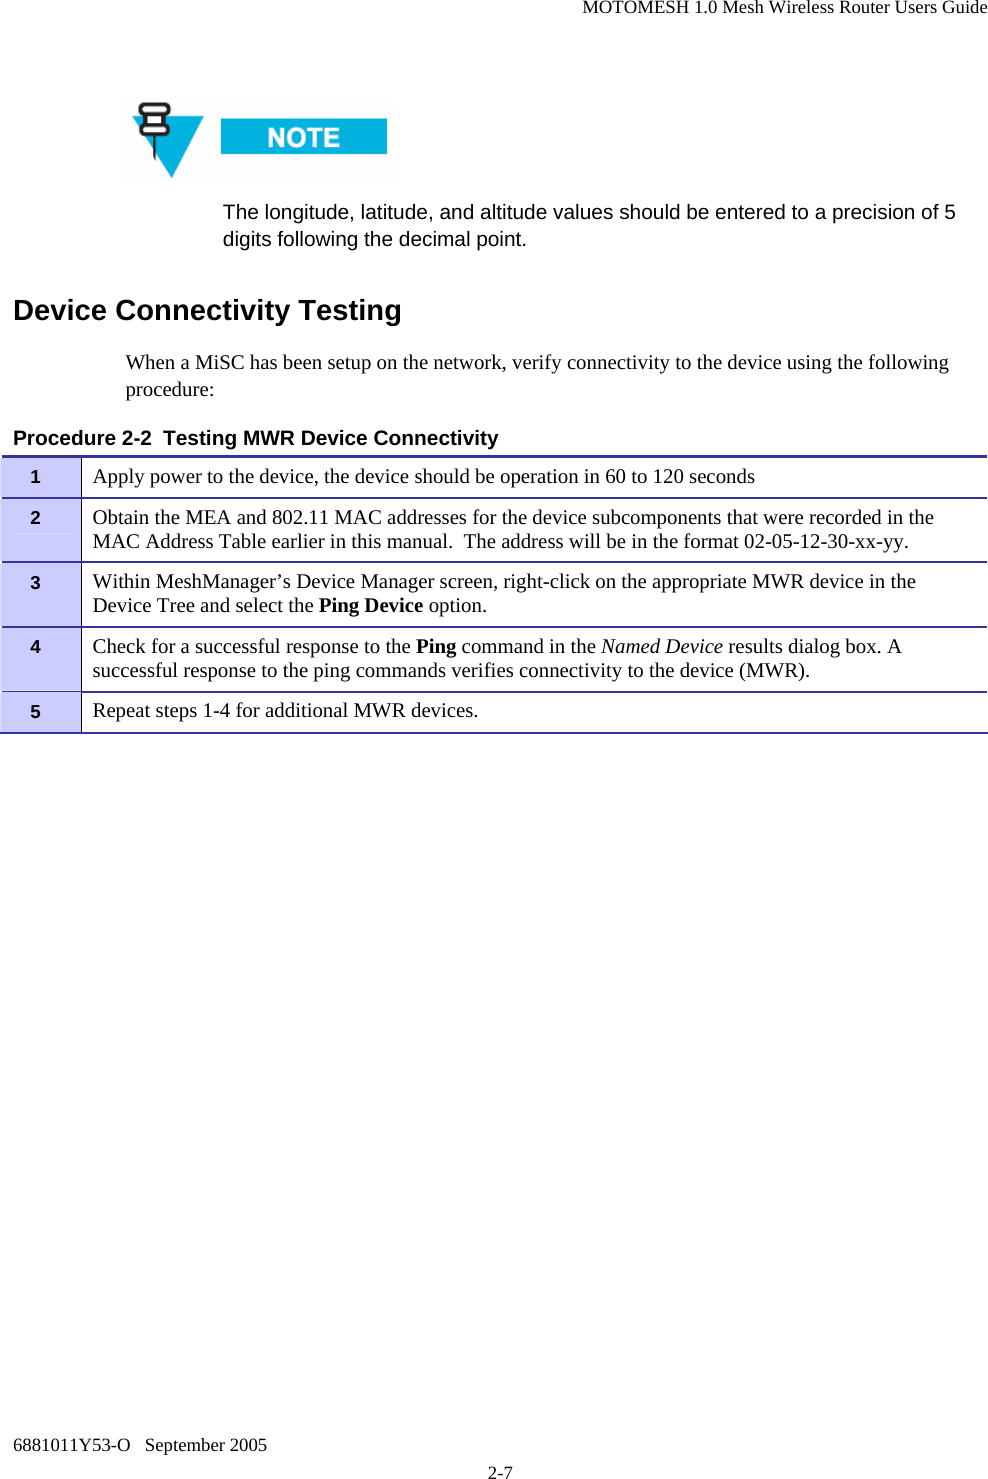 MOTOMESH 1.0 Mesh Wireless Router Users Guide 6881011Y53-O   September 2005 2-7   The longitude, latitude, and altitude values should be entered to a precision of 5 digits following the decimal point. Device Connectivity Testing When a MiSC has been setup on the network, verify connectivity to the device using the following procedure: Procedure 2-2  Testing MWR Device Connectivity 1   Apply power to the device, the device should be operation in 60 to 120 seconds 2   Obtain the MEA and 802.11 MAC addresses for the device subcomponents that were recorded in the MAC Address Table earlier in this manual.  The address will be in the format 02-05-12-30-xx-yy. 3   Within MeshManager’s Device Manager screen, right-click on the appropriate MWR device in the Device Tree and select the Ping Device option. 4   Check for a successful response to the Ping command in the Named Device results dialog box. A successful response to the ping commands verifies connectivity to the device (MWR). 5   Repeat steps 1-4 for additional MWR devices. 